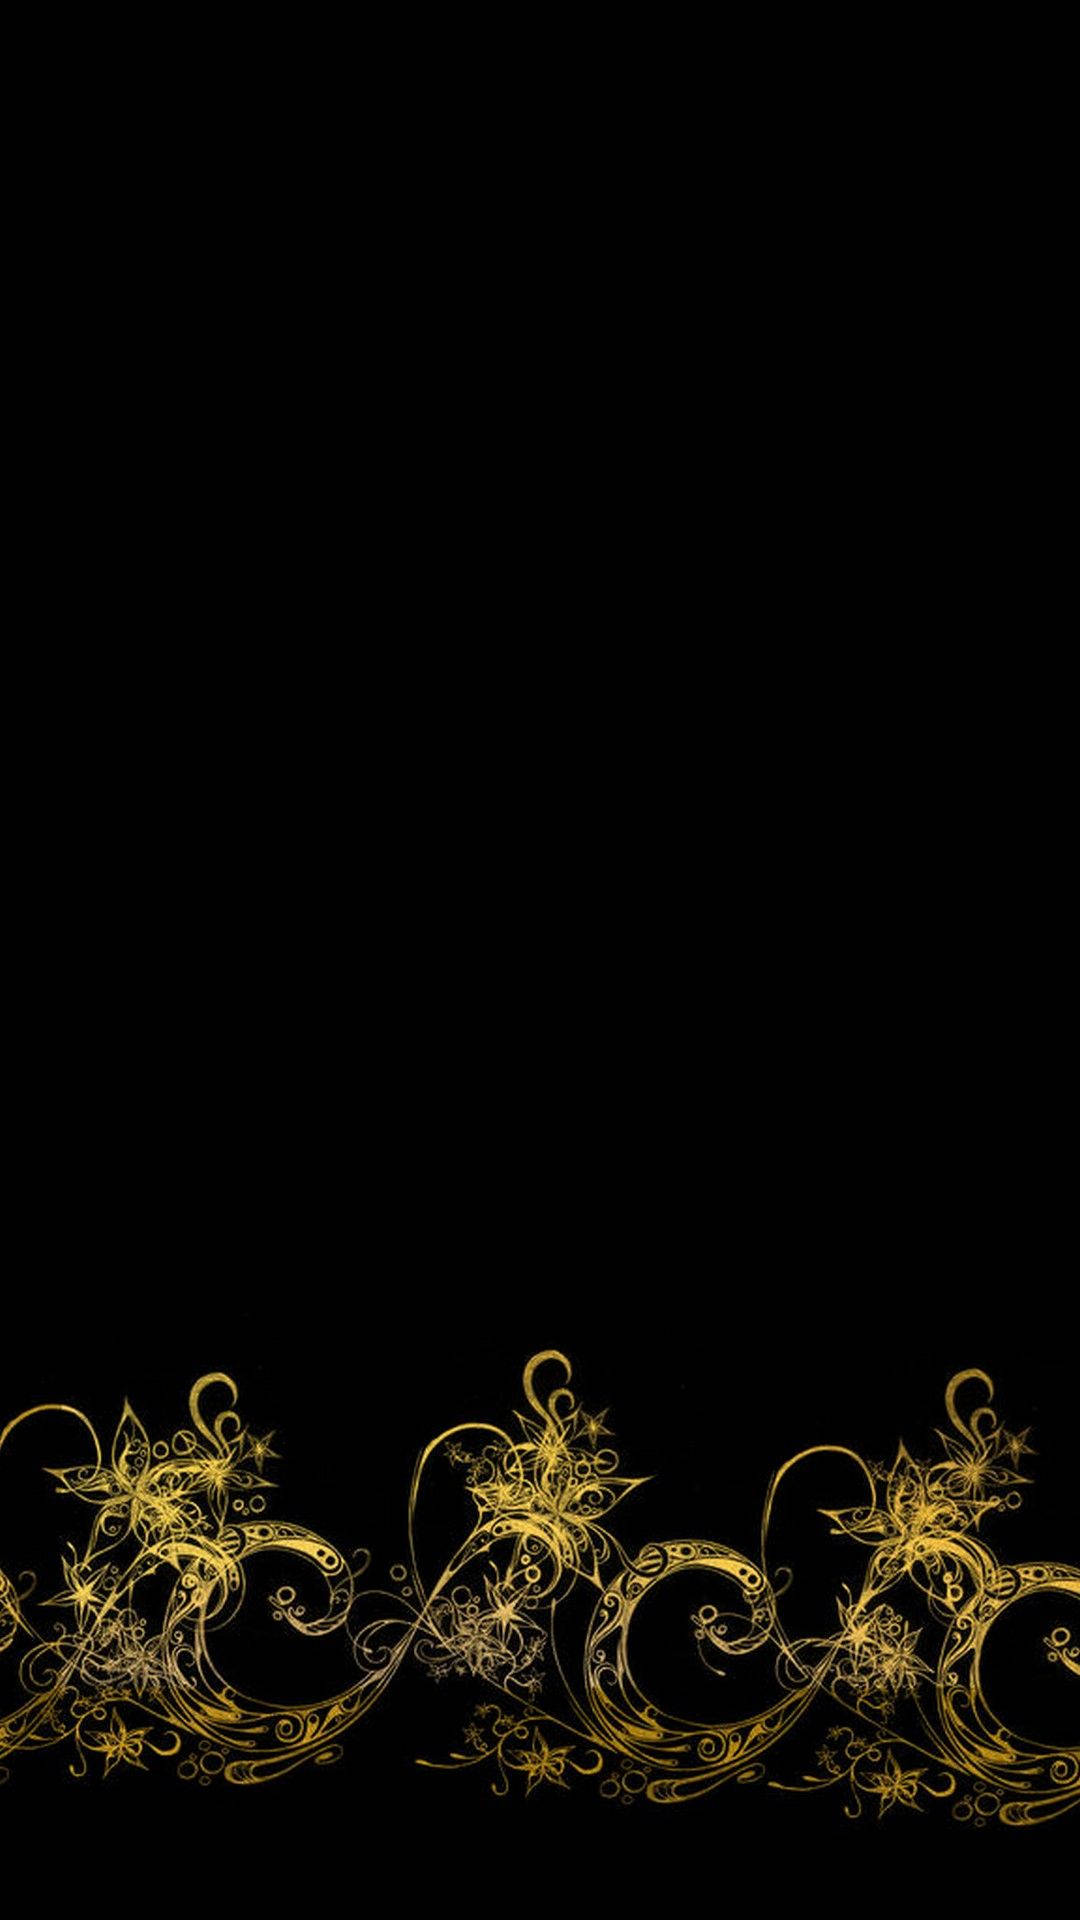 Black Android With Ornate Gold Design Wallpaper